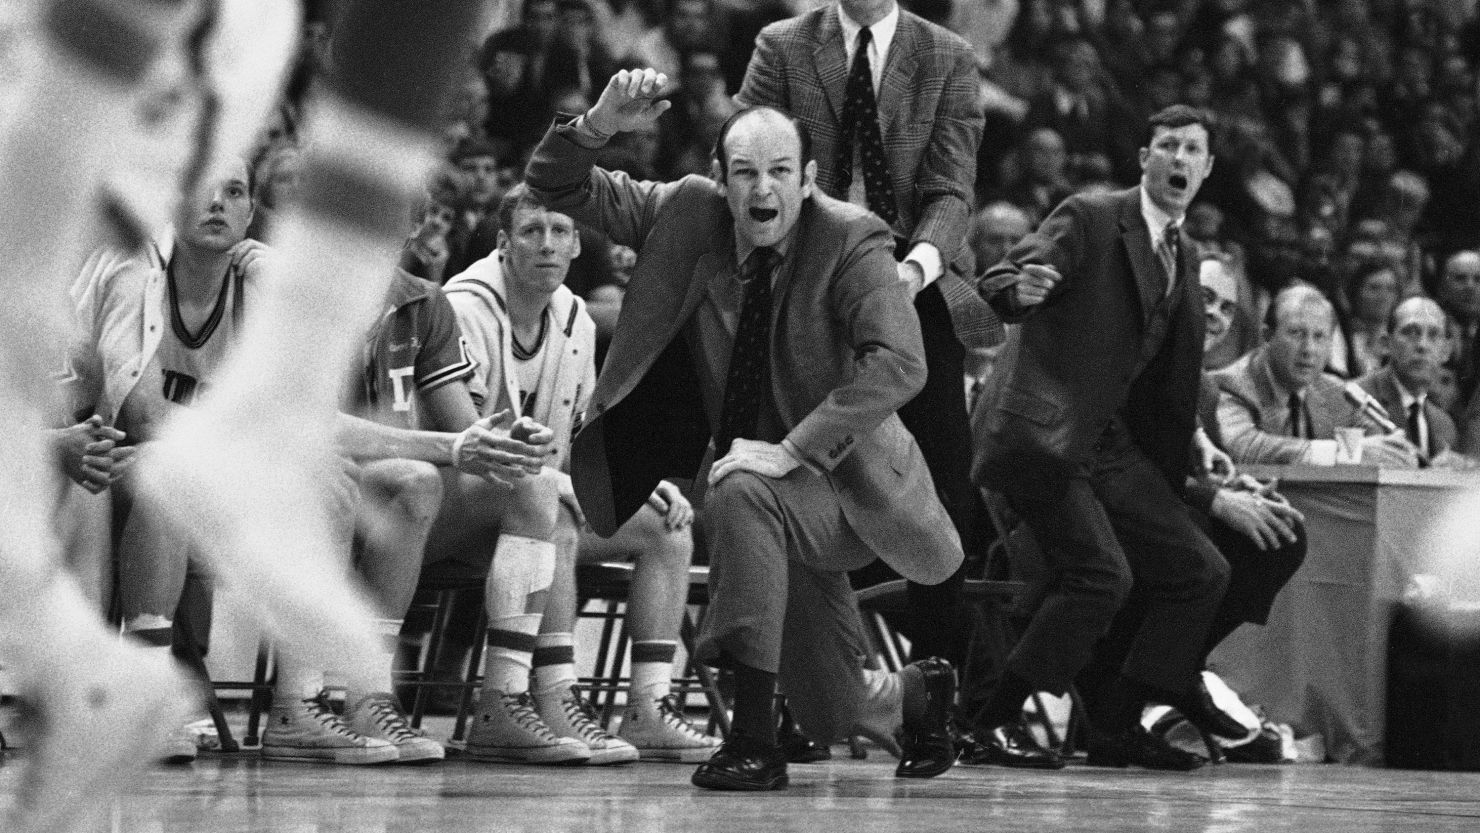 Charles "Lefty" Driesell drops to a knee as he watches North Carolina win on March 15, 1969 at the NCAA Eastern Regional basketball tournament in Maryland.